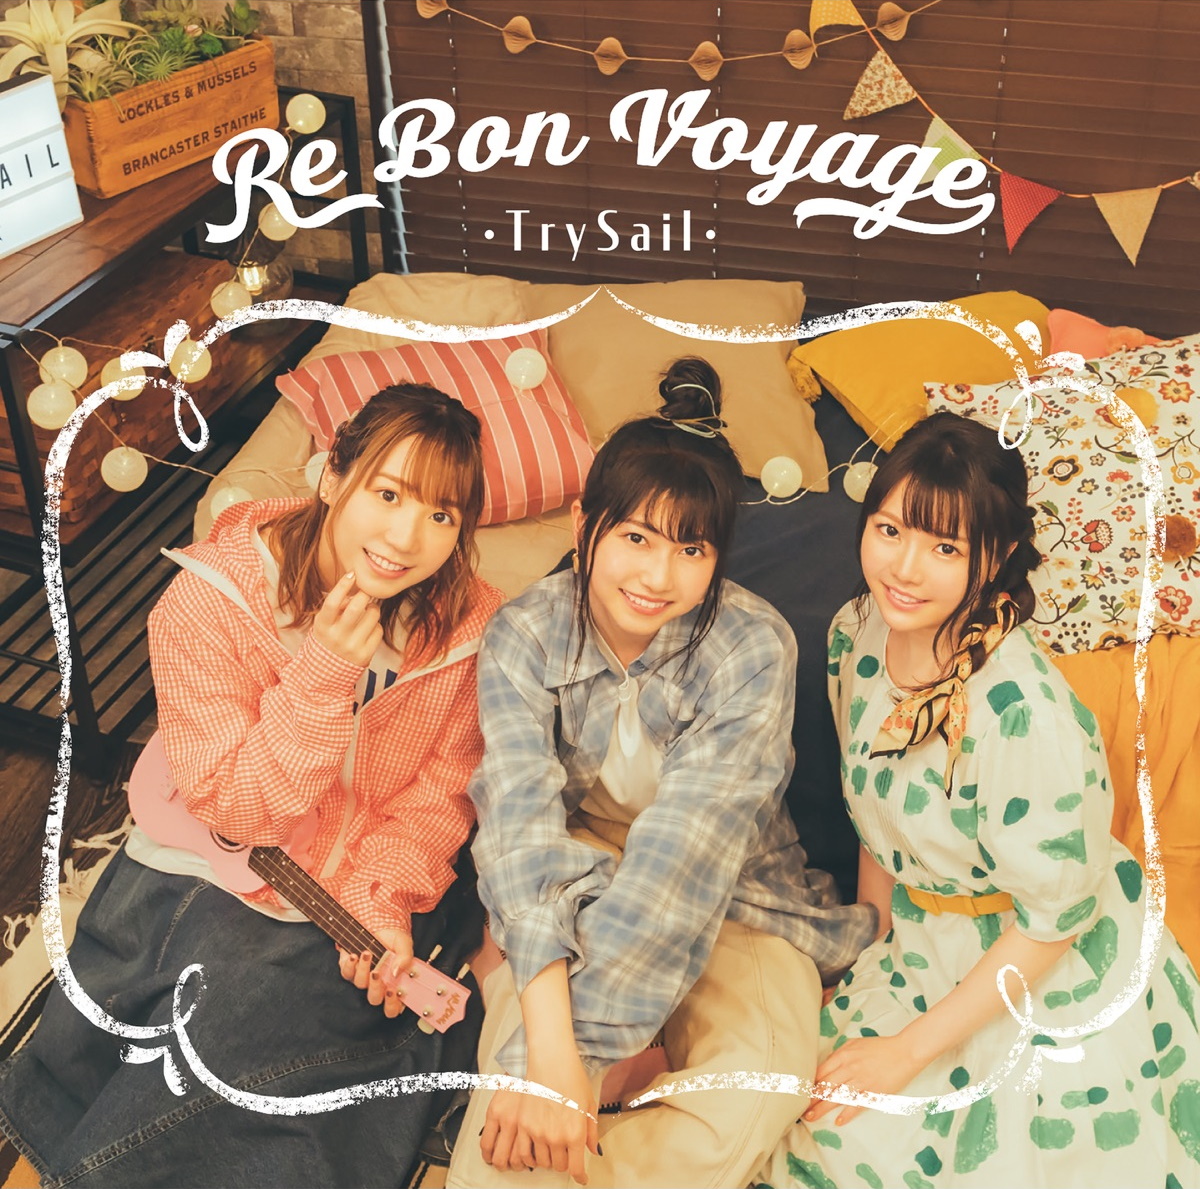 Cover for『TrySail - Re Bon Voyage』from the release『Re Bon Voyage』